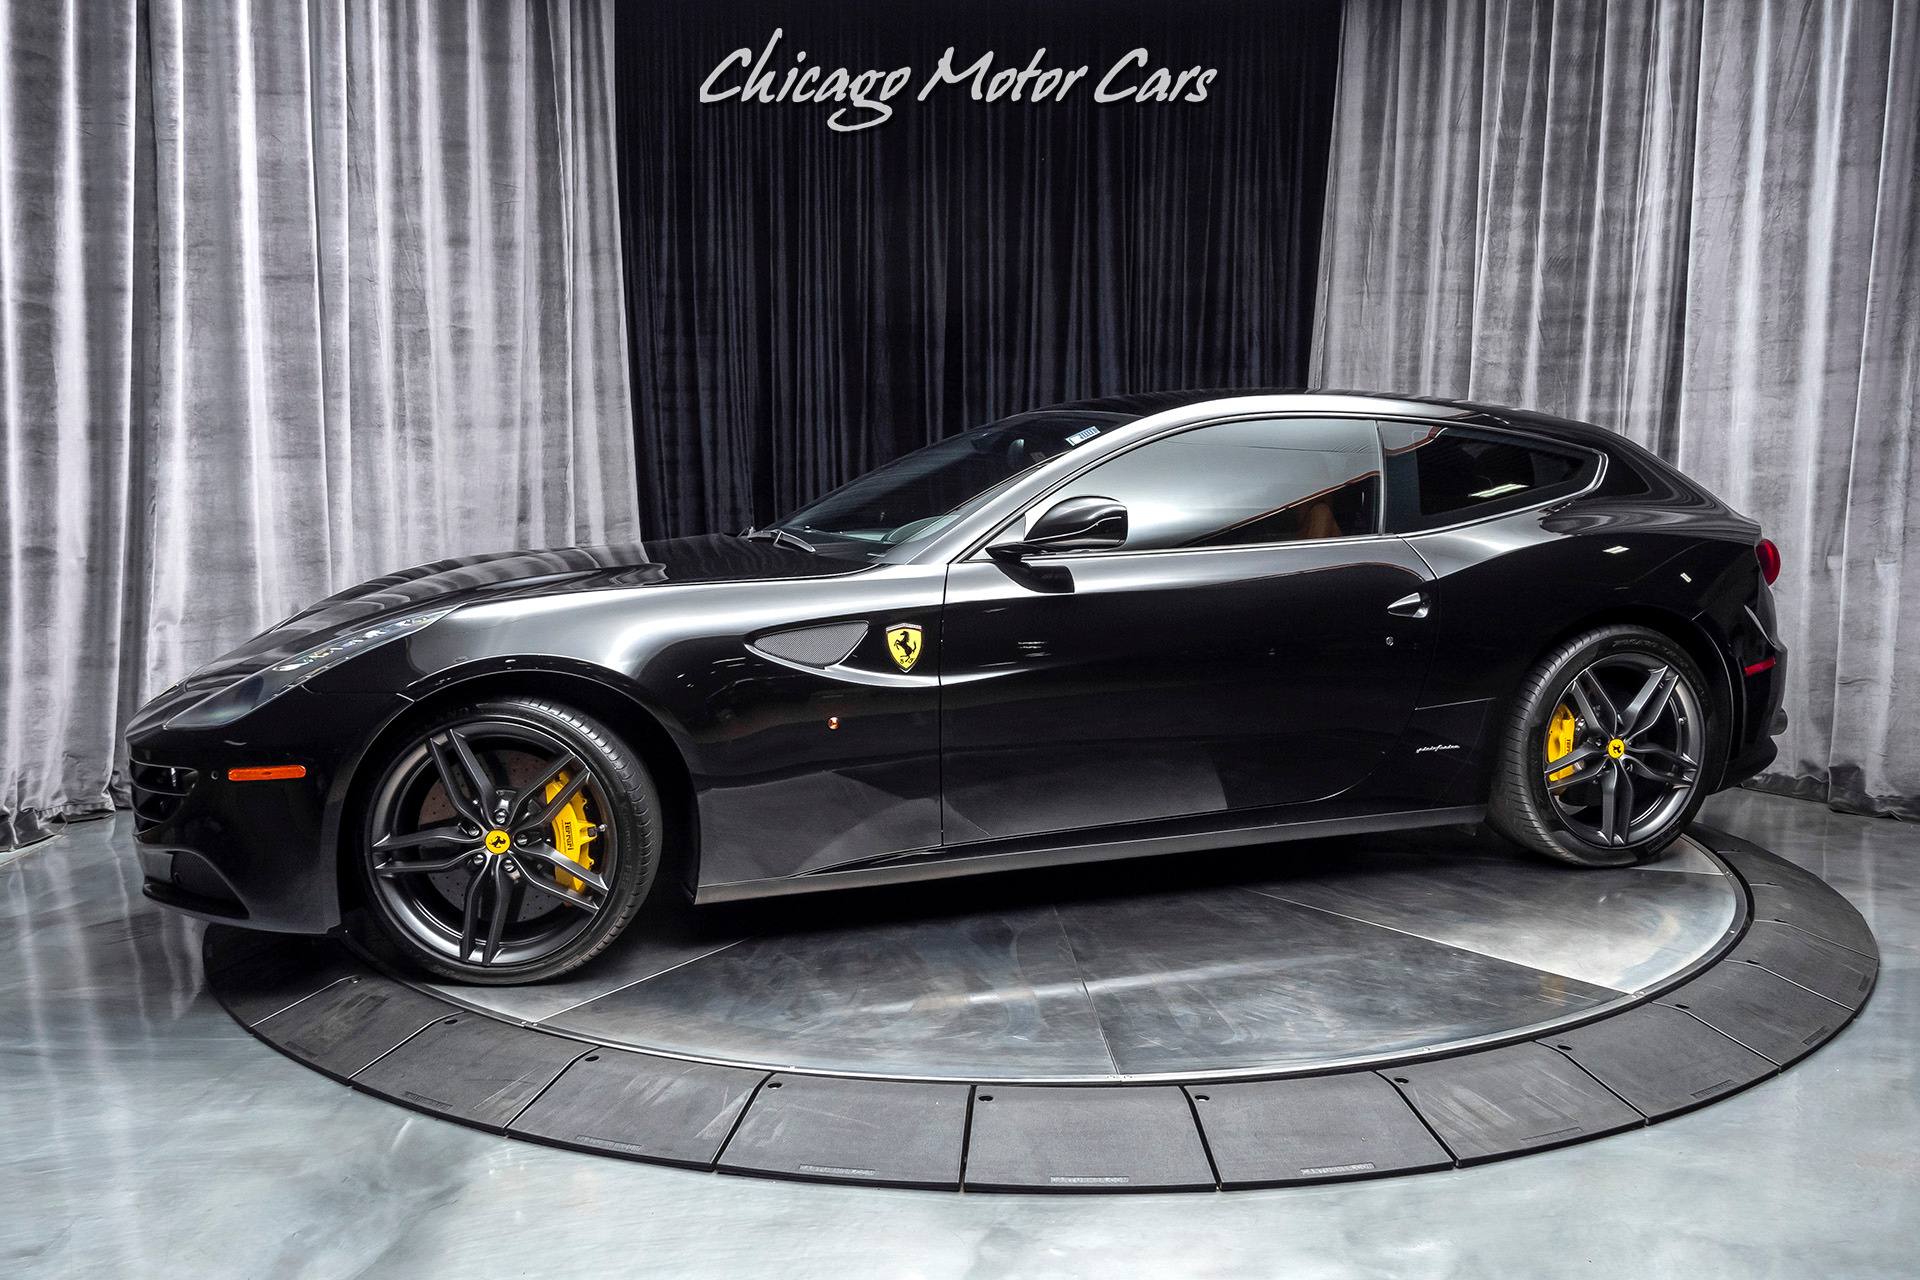 Used 2016 Ferrari FF Hatchback PANORAMIC GLASS ROOF! CARBON FIBER STEERING  WHEEL + LEDS! For Sale (Special Pricing) | Chicago Motor Cars Stock #17113